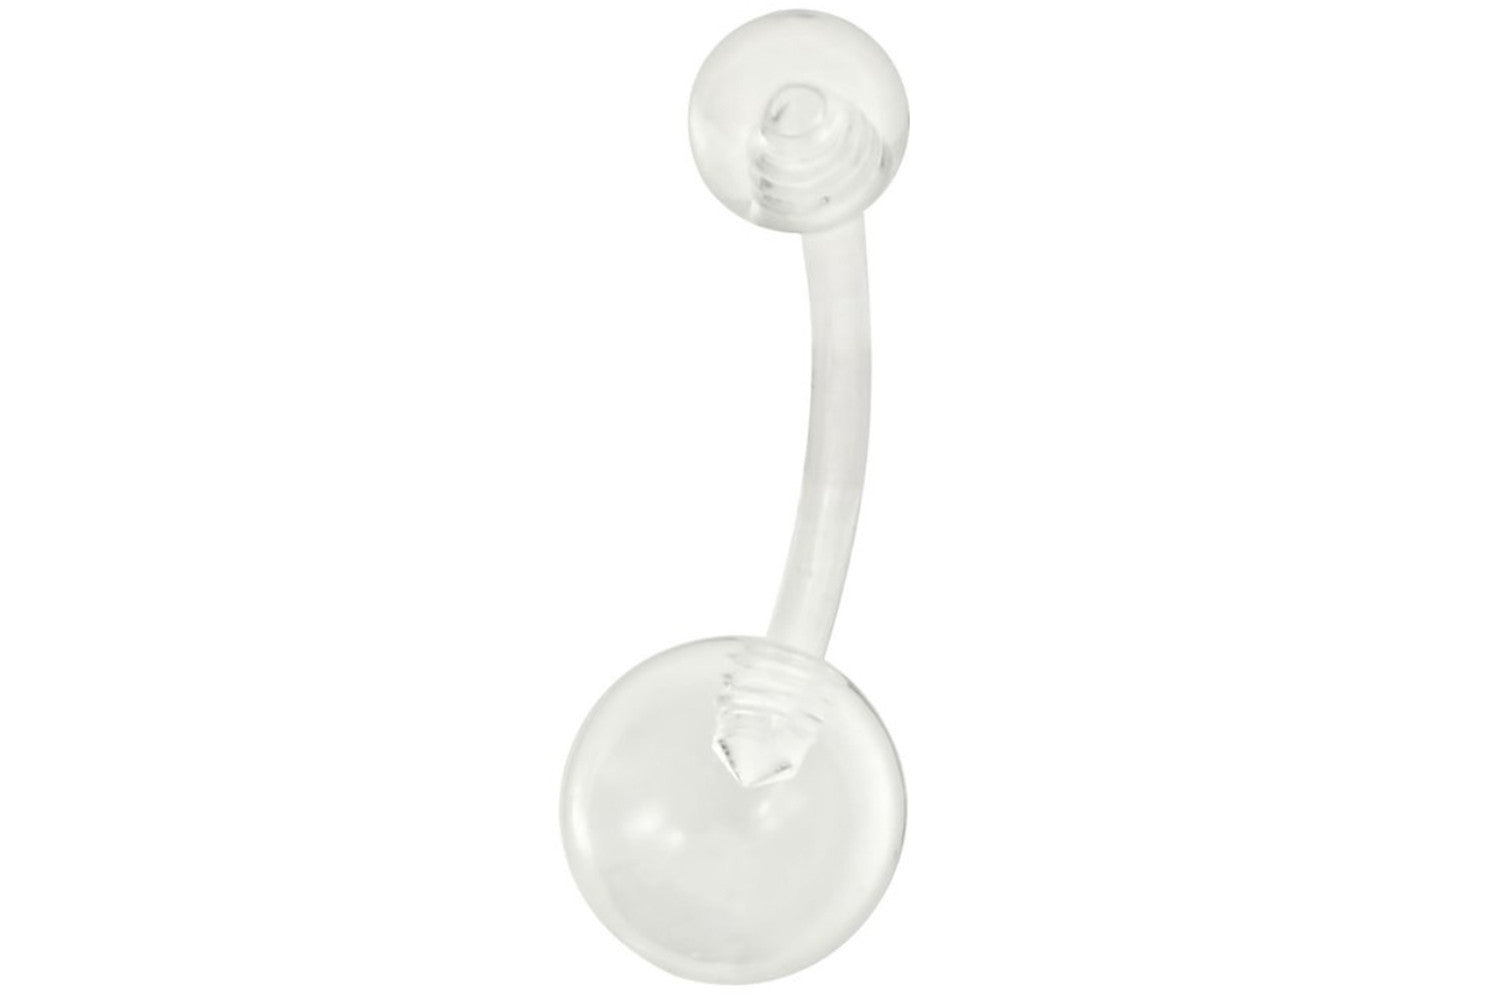 This body jewelry has a bio-compatible Bio Flex shaft. The balls are made with acrylic. This jewelry is an ideal alternative for surgeries, metal allergies, MRI's and many other situations in which metal can not be worn.